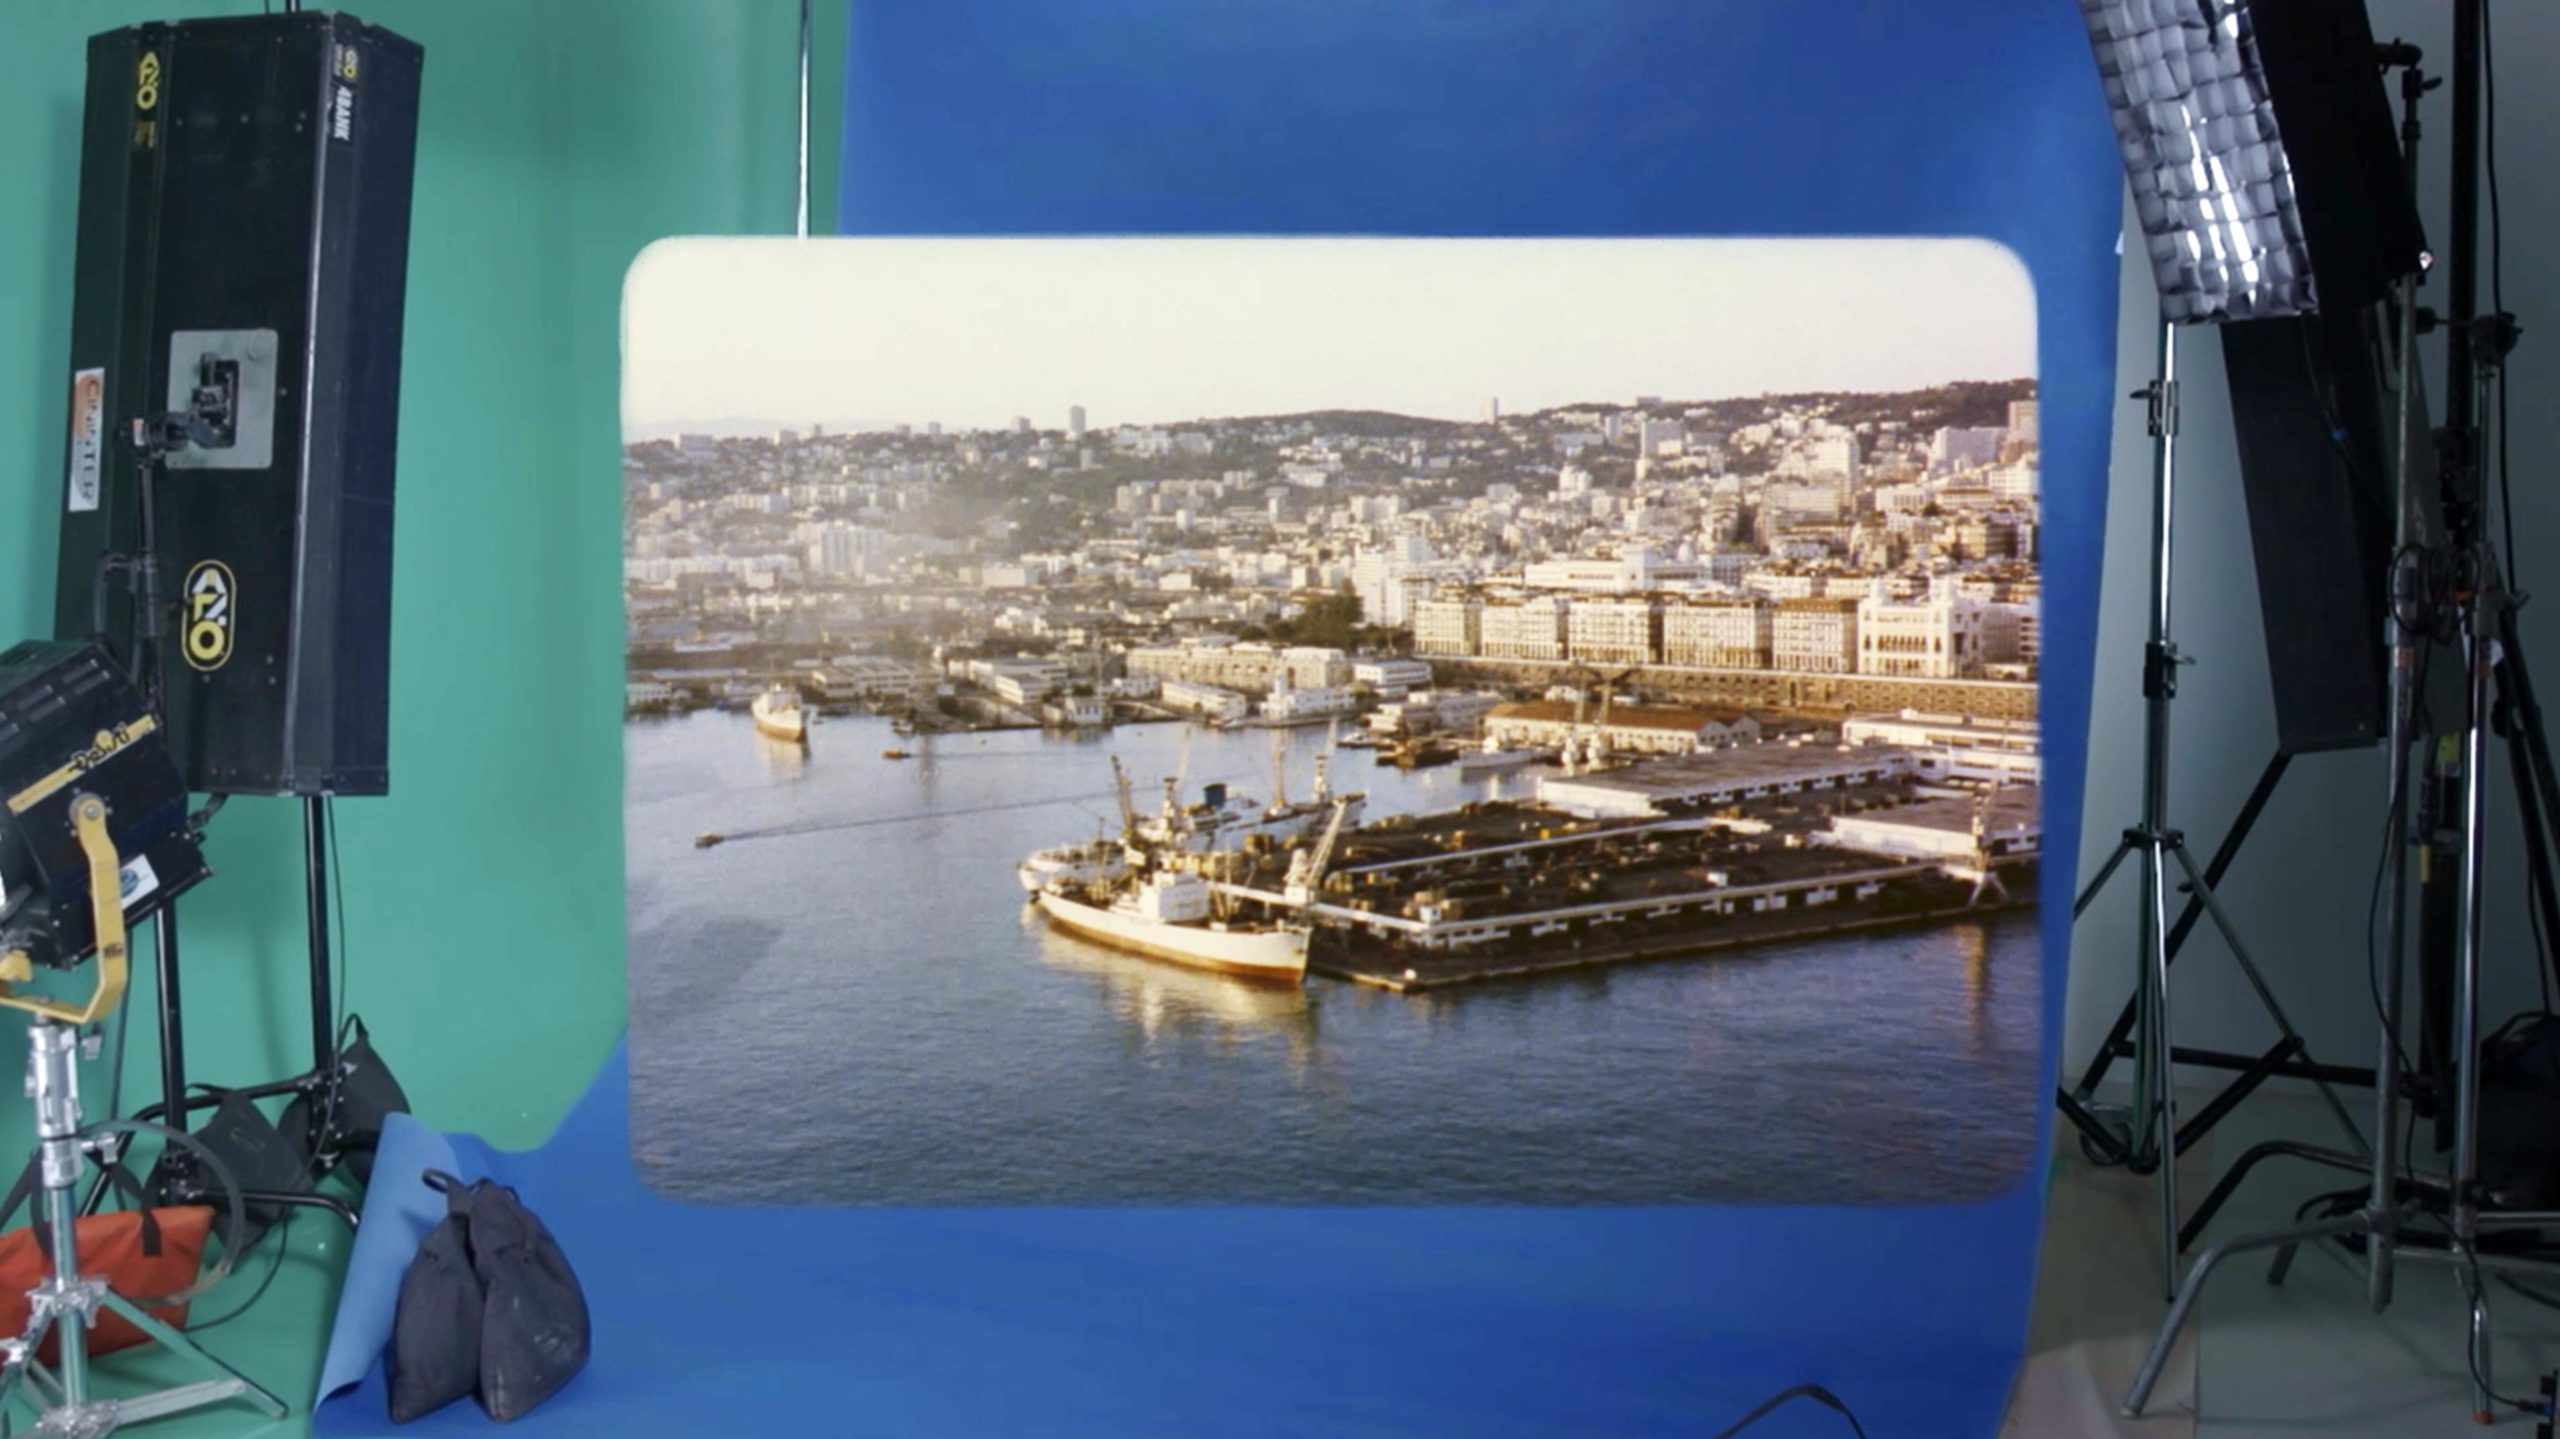 photo of harbour is seen projected onto blue and green screen background surround by film set lighting rigs